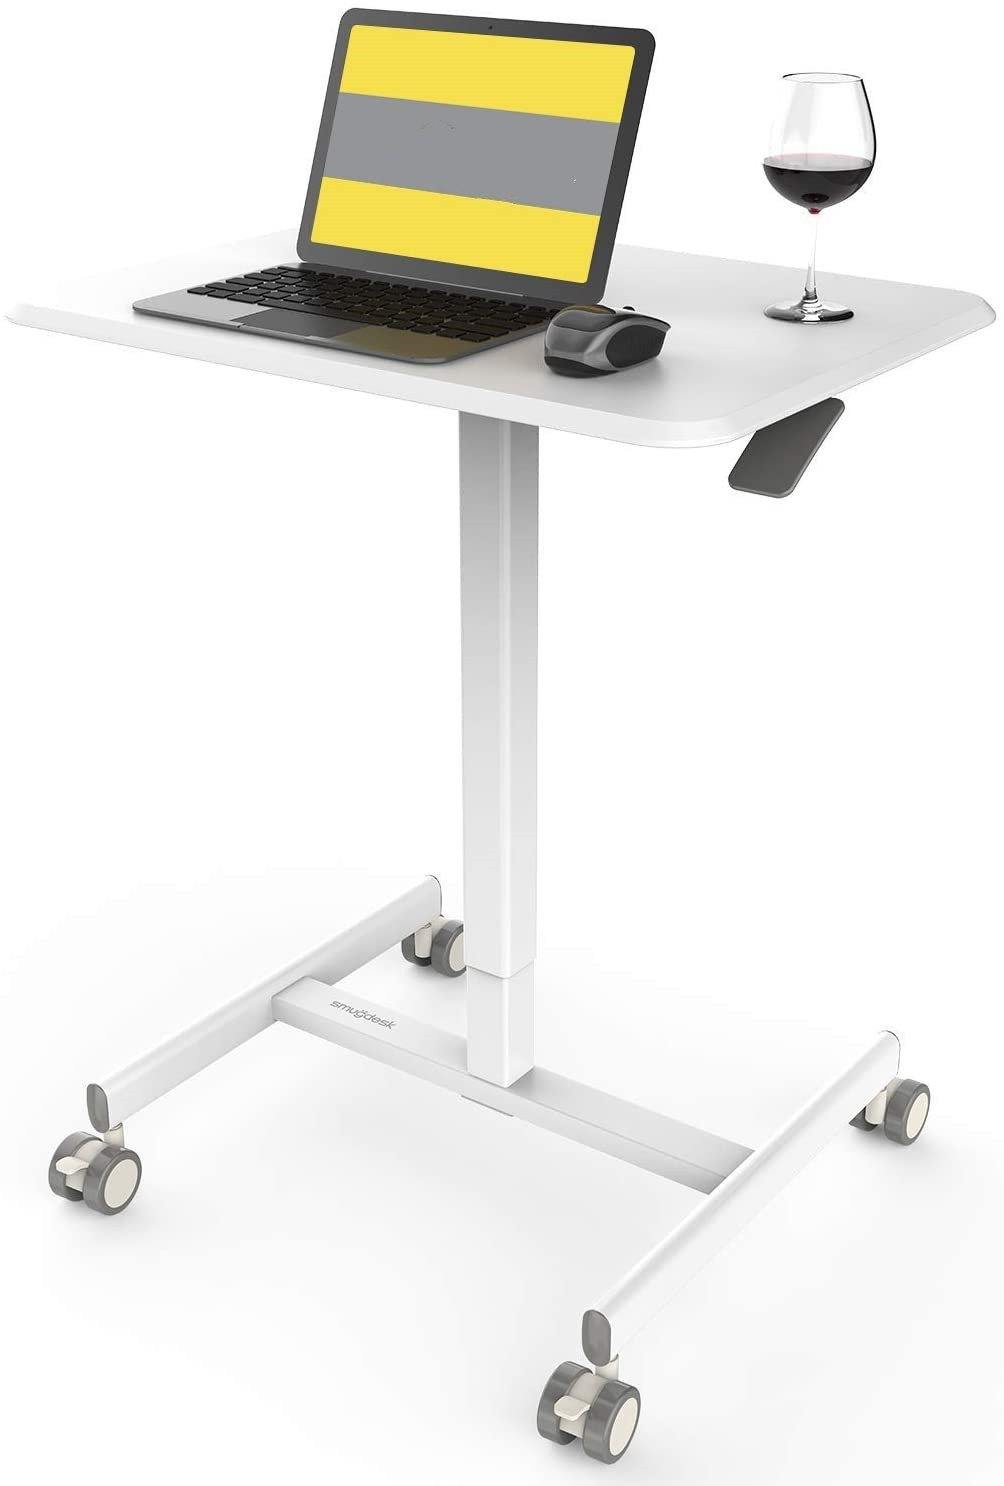 Mobile Sit-Stand Desk Adjustable Height Laptop Desk Cart Ergonomic Table Small Standing Desk with Pneumatic Height Adjustments, Black,White - Trendha